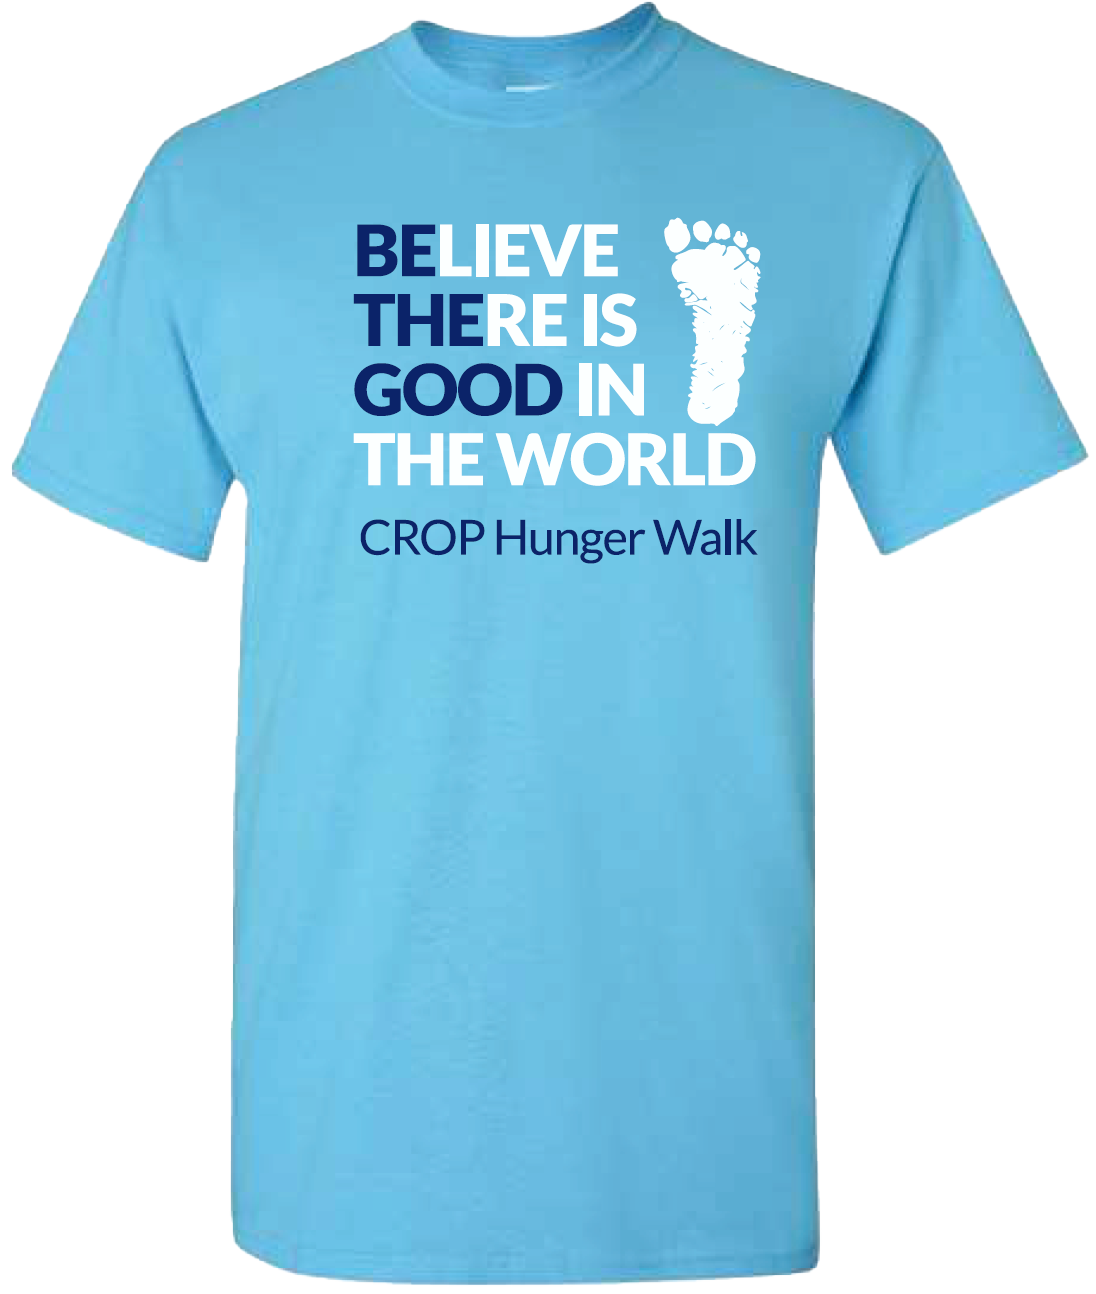 Believe there is Good in the World CROP Hunger Walk shirt